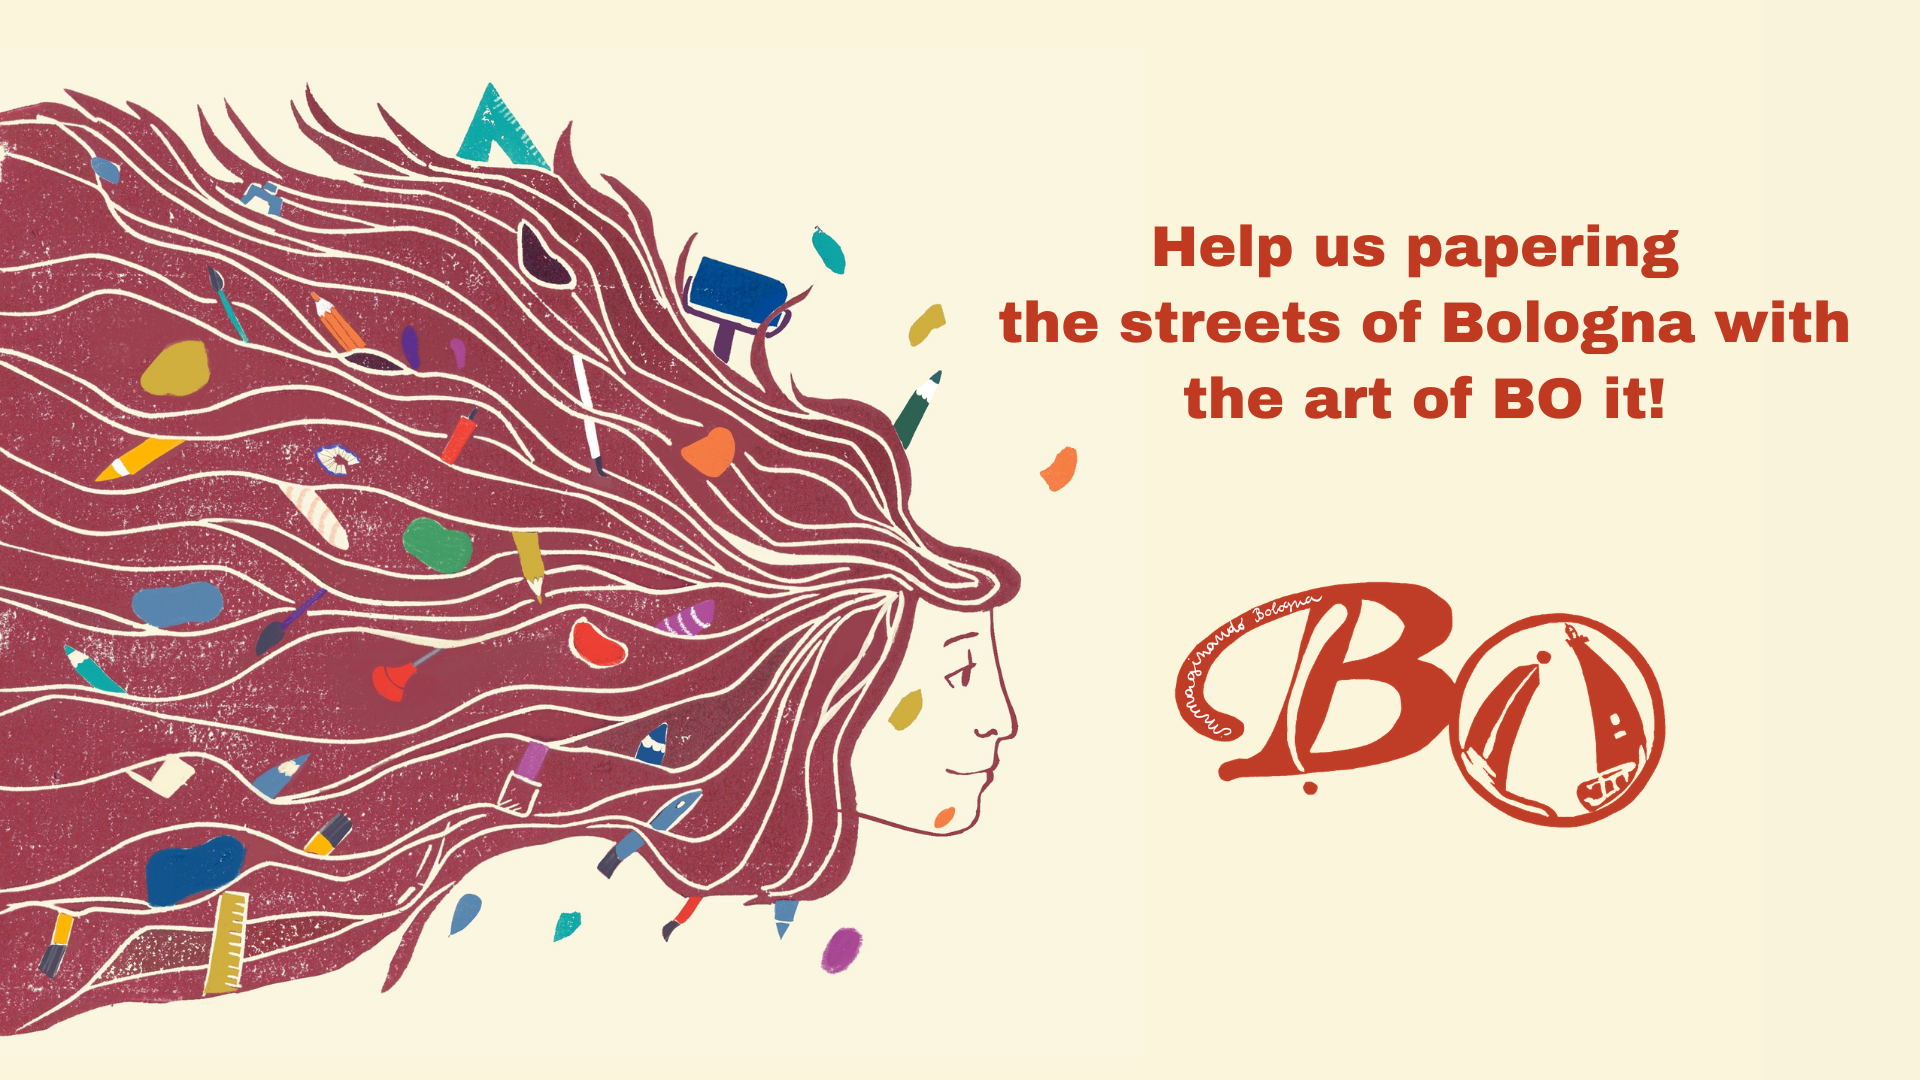 Help us papering the streets of Bologna with the art of BO it!